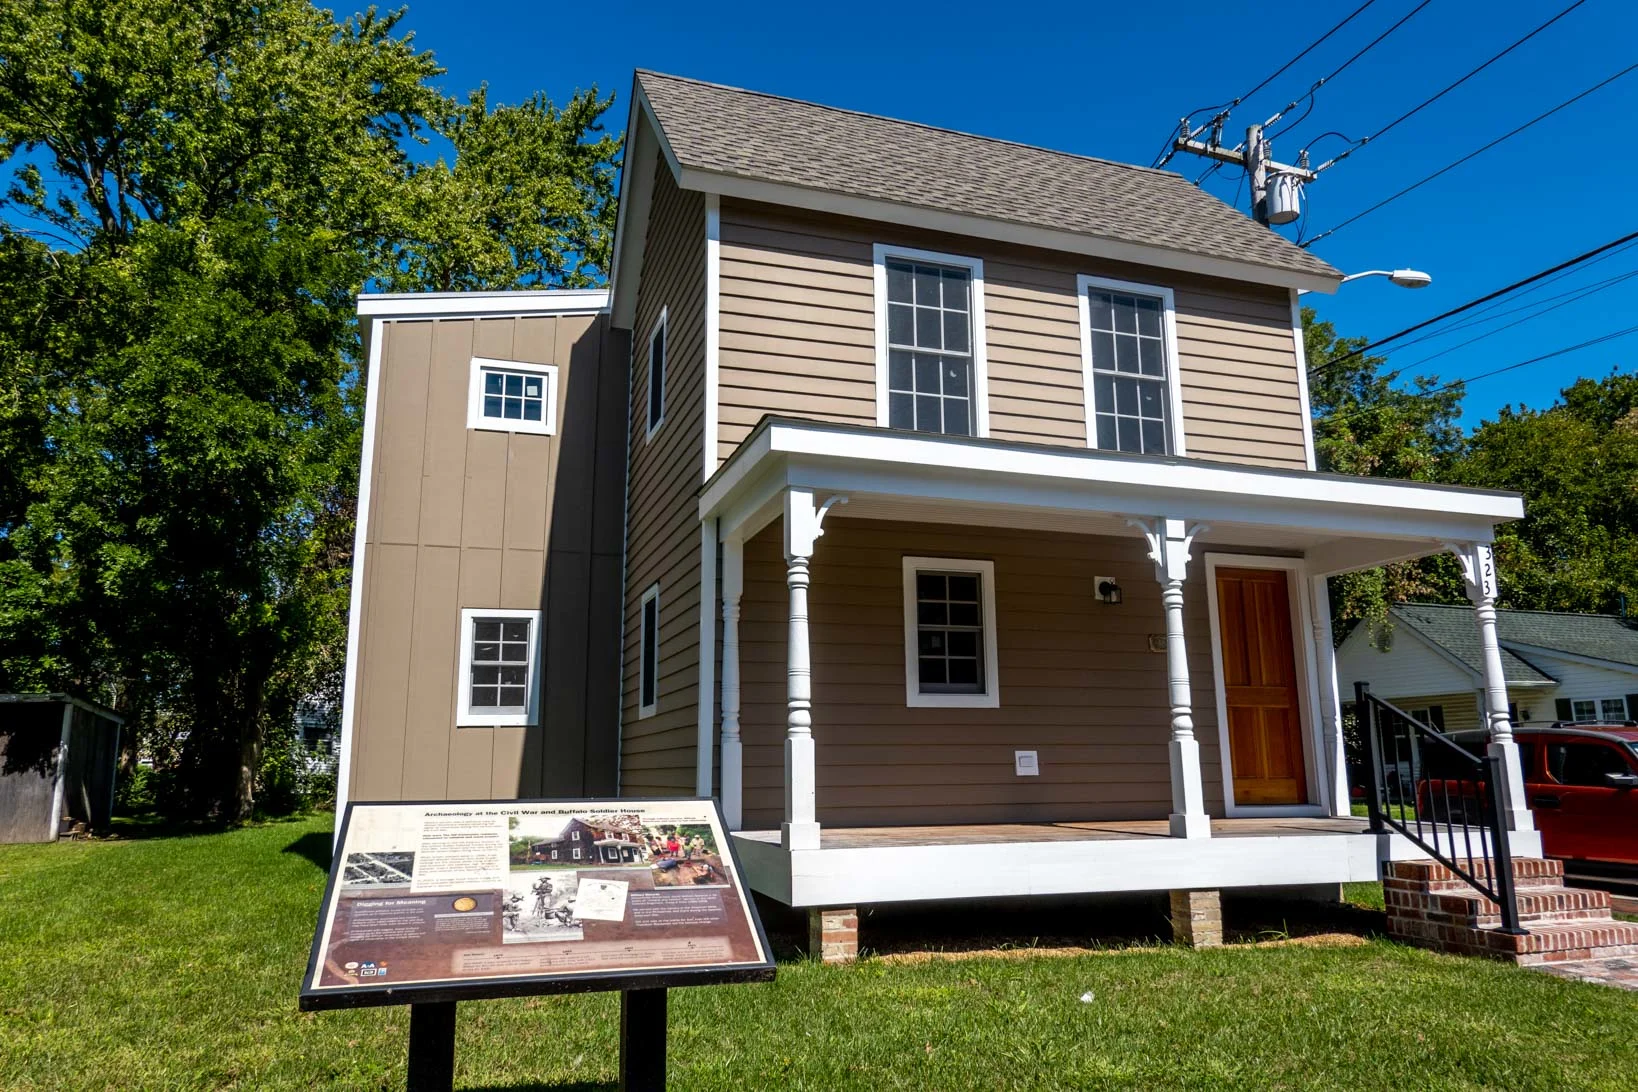 Brown house with information panel in front